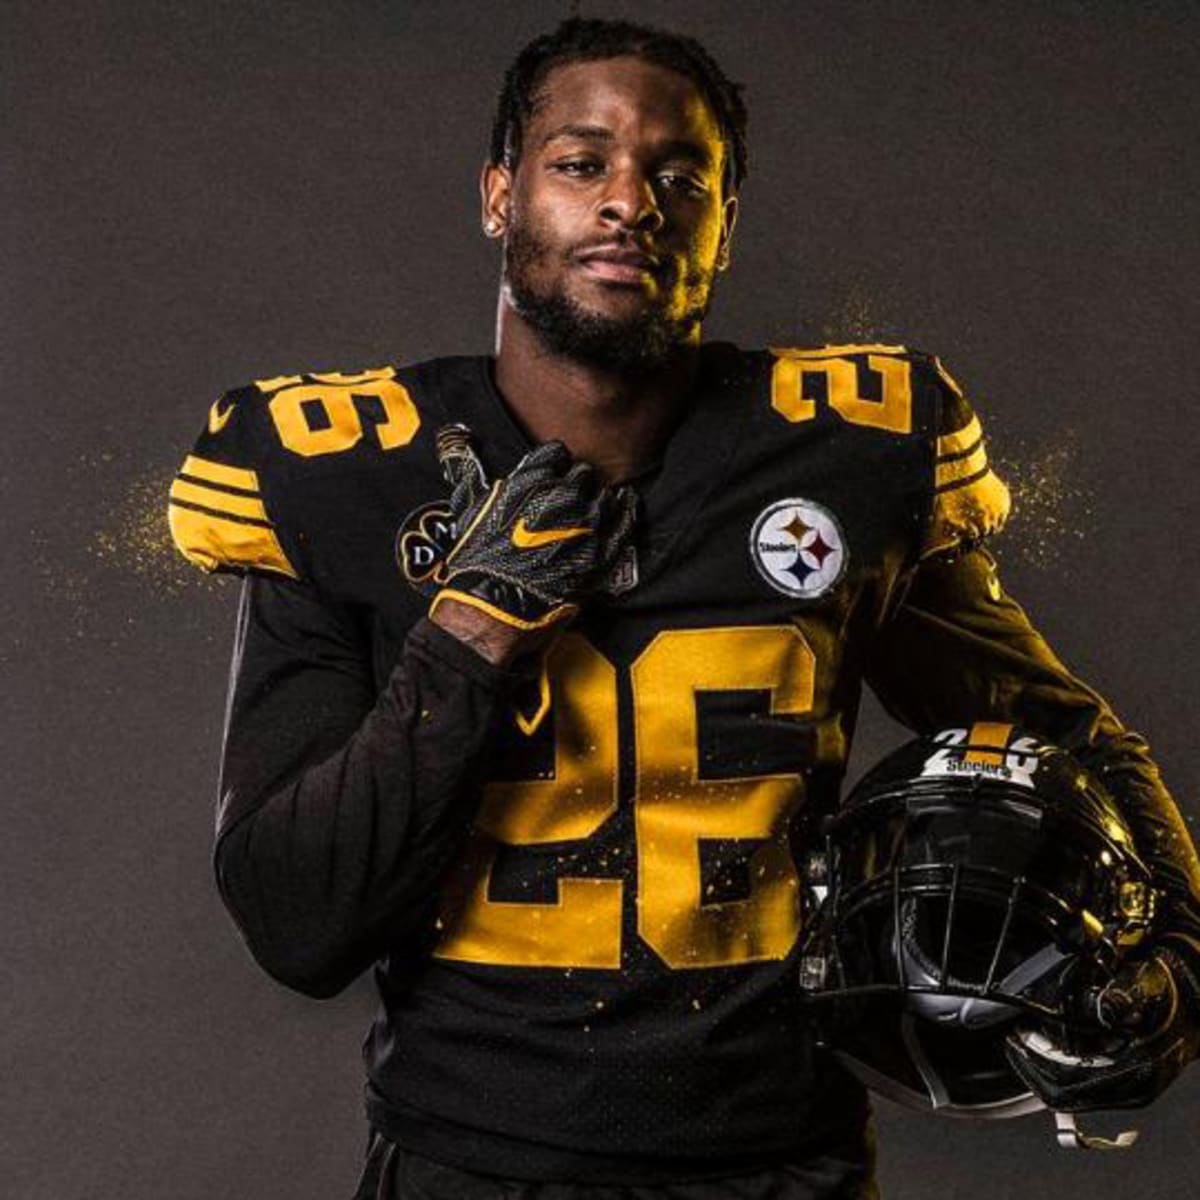 Steelers will wear their Color Rush uniforms vs. the Bills in Week